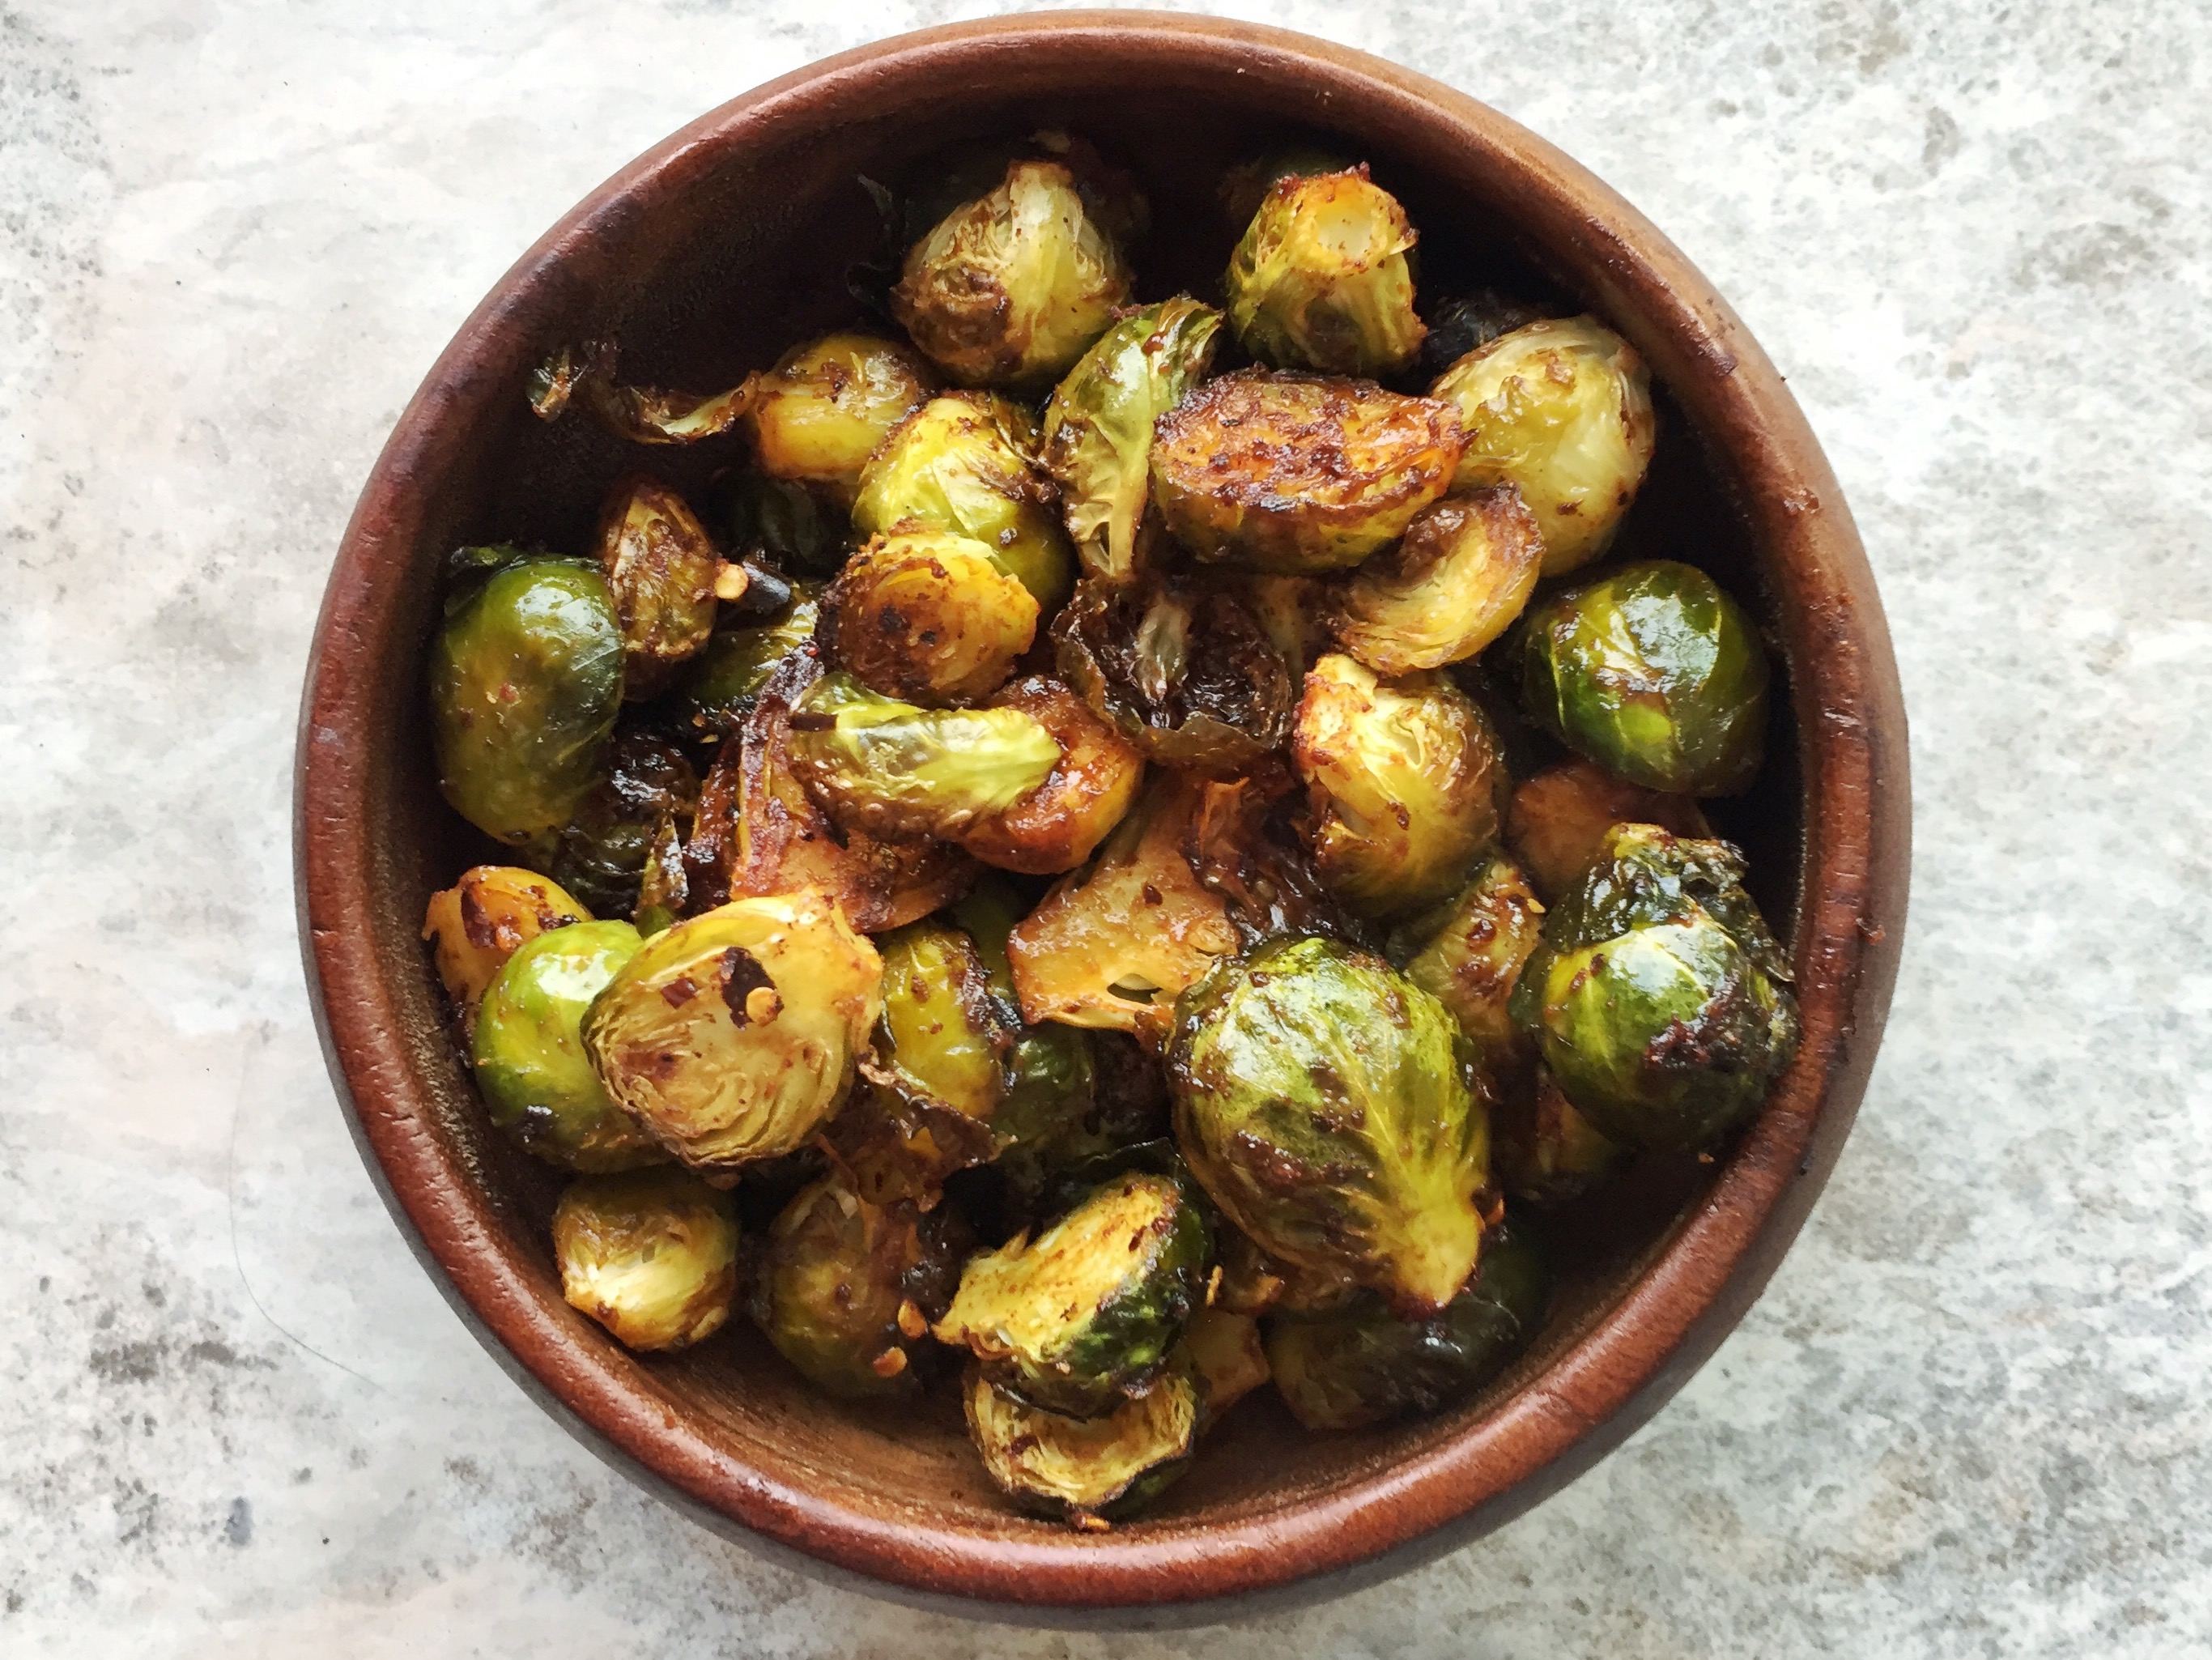 Duck fat roasted brussel sprouts with oyster sauce